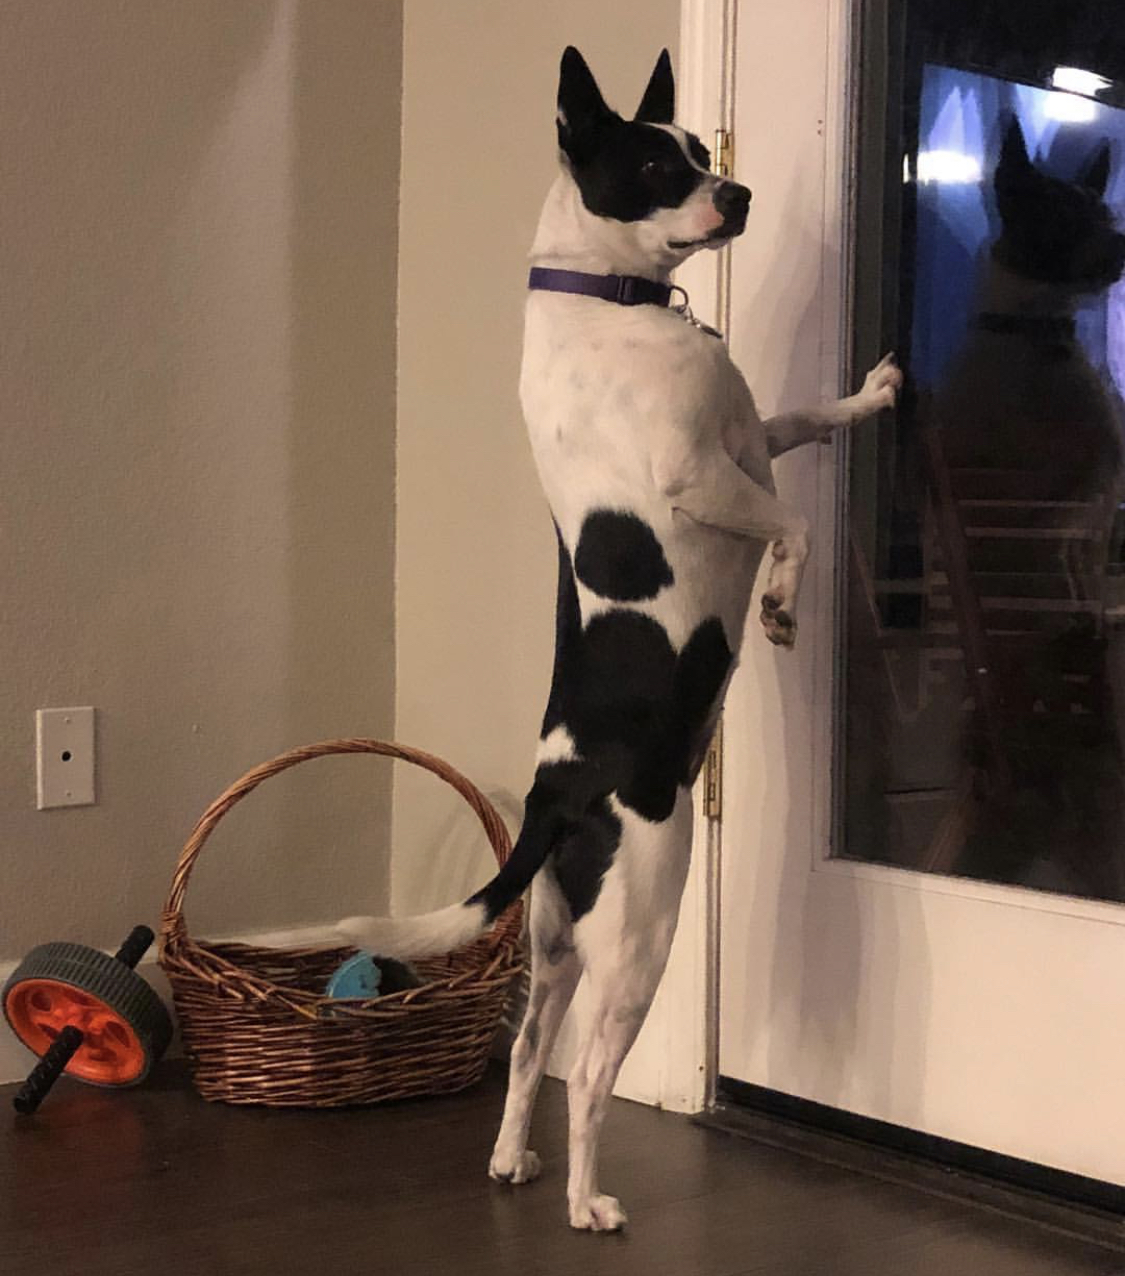 A Boston Bull Terrier standing up looking outside the window with its one paw leaning on the glass